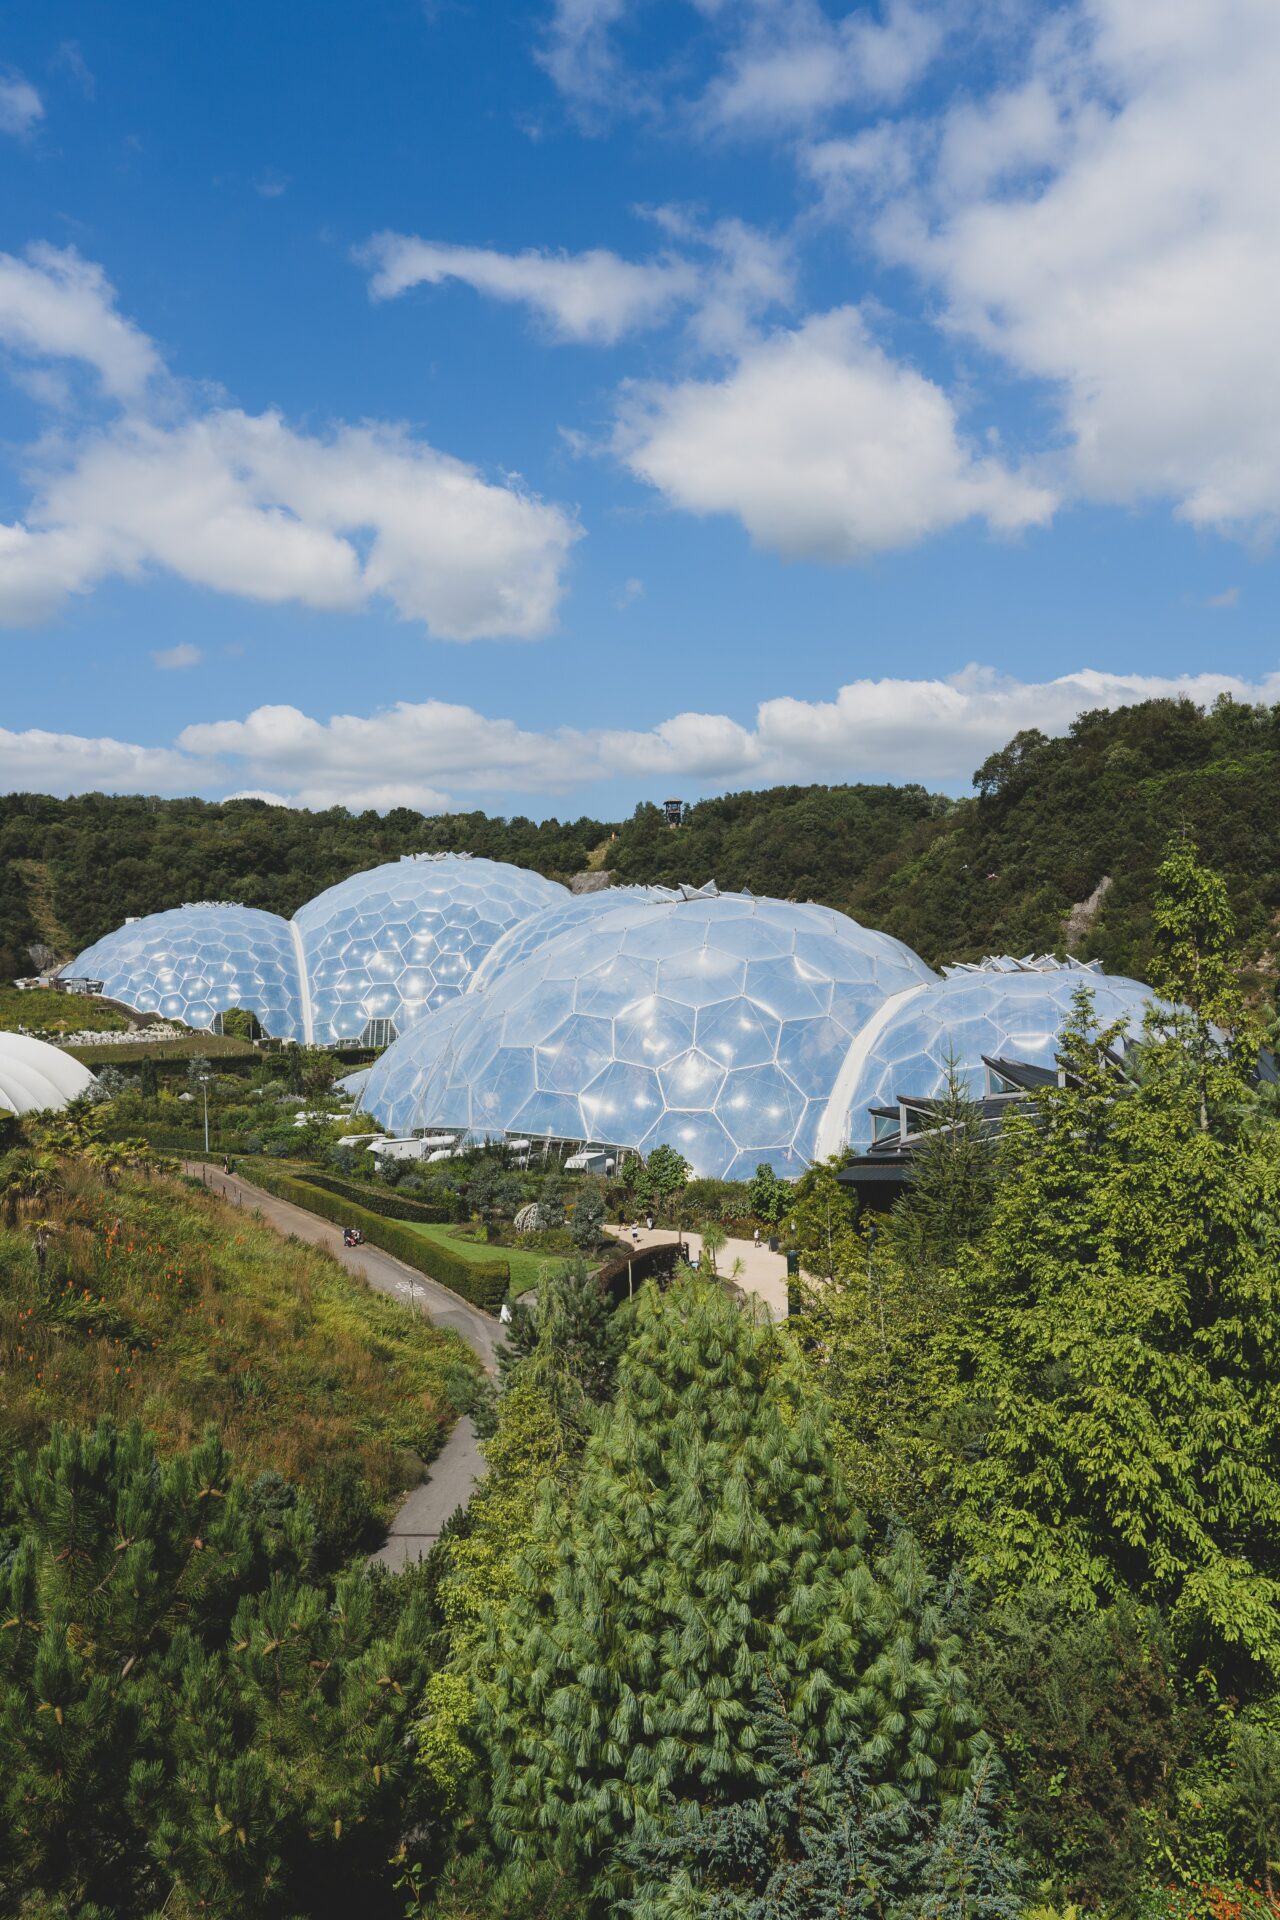 An aerial image of the eden project greenhouses